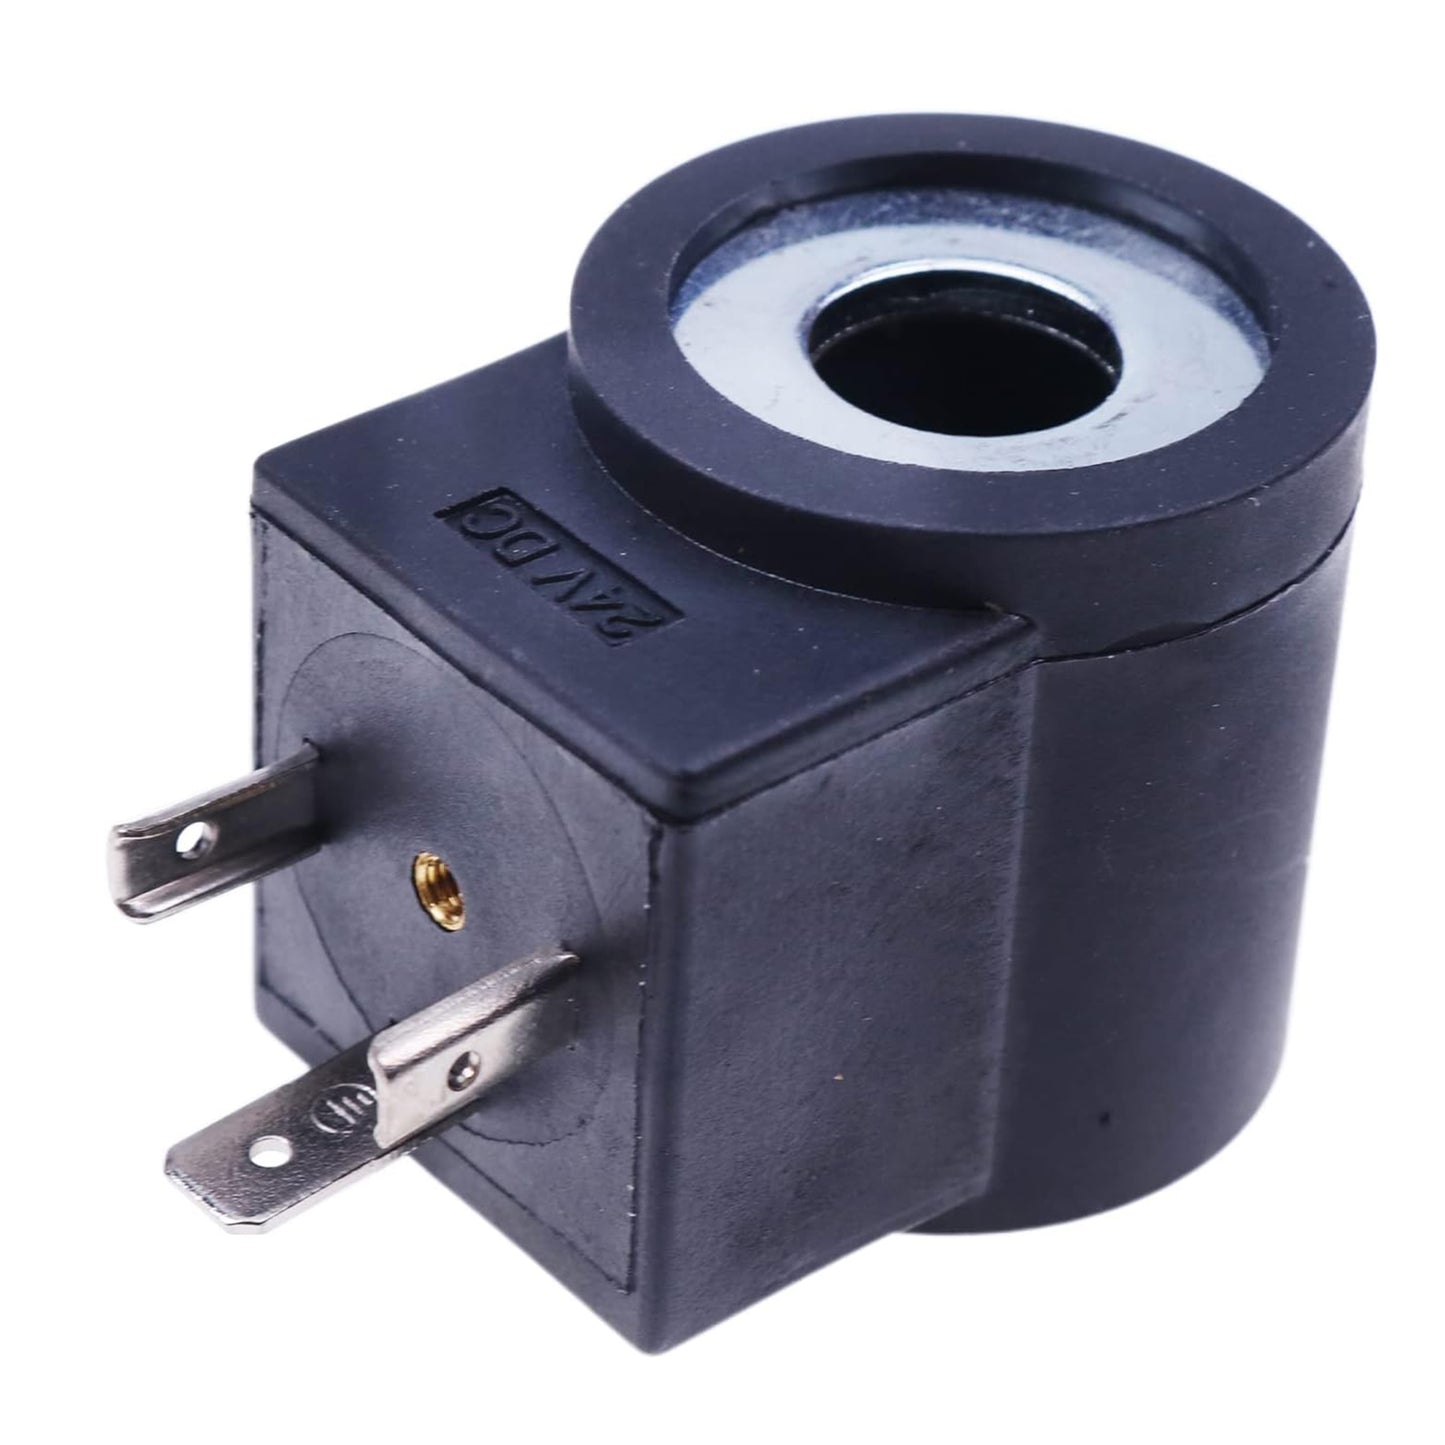 6306024 Solenoid Valve Coil Compatible with Hydraforce 08 80 88 98 Series